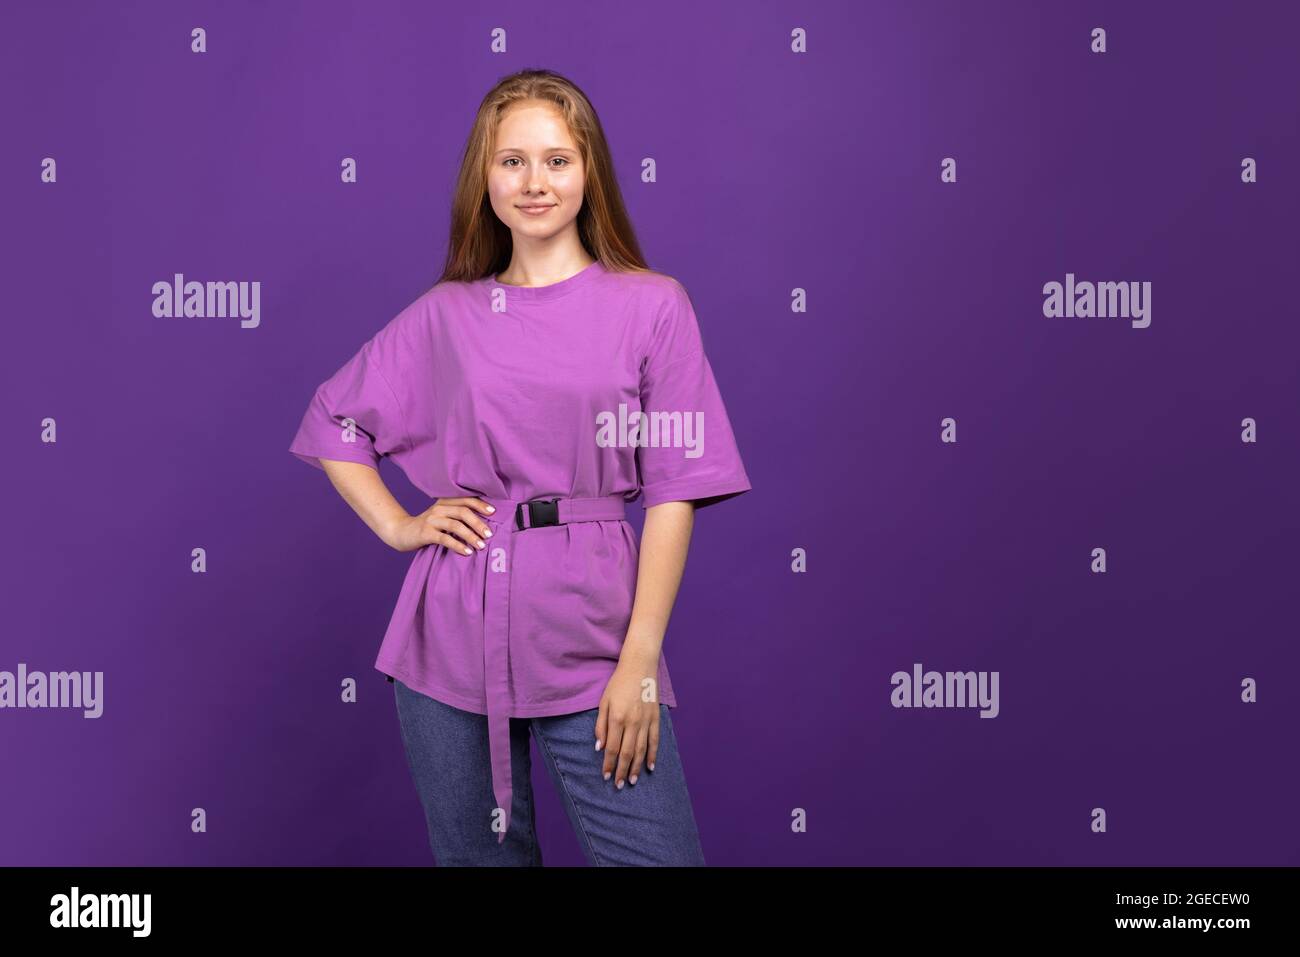 Half-length portrait of young beautiful girl isolated on purple studio background. Concept of human emotions, facial expression, youth, sales, ad. Stock Photo